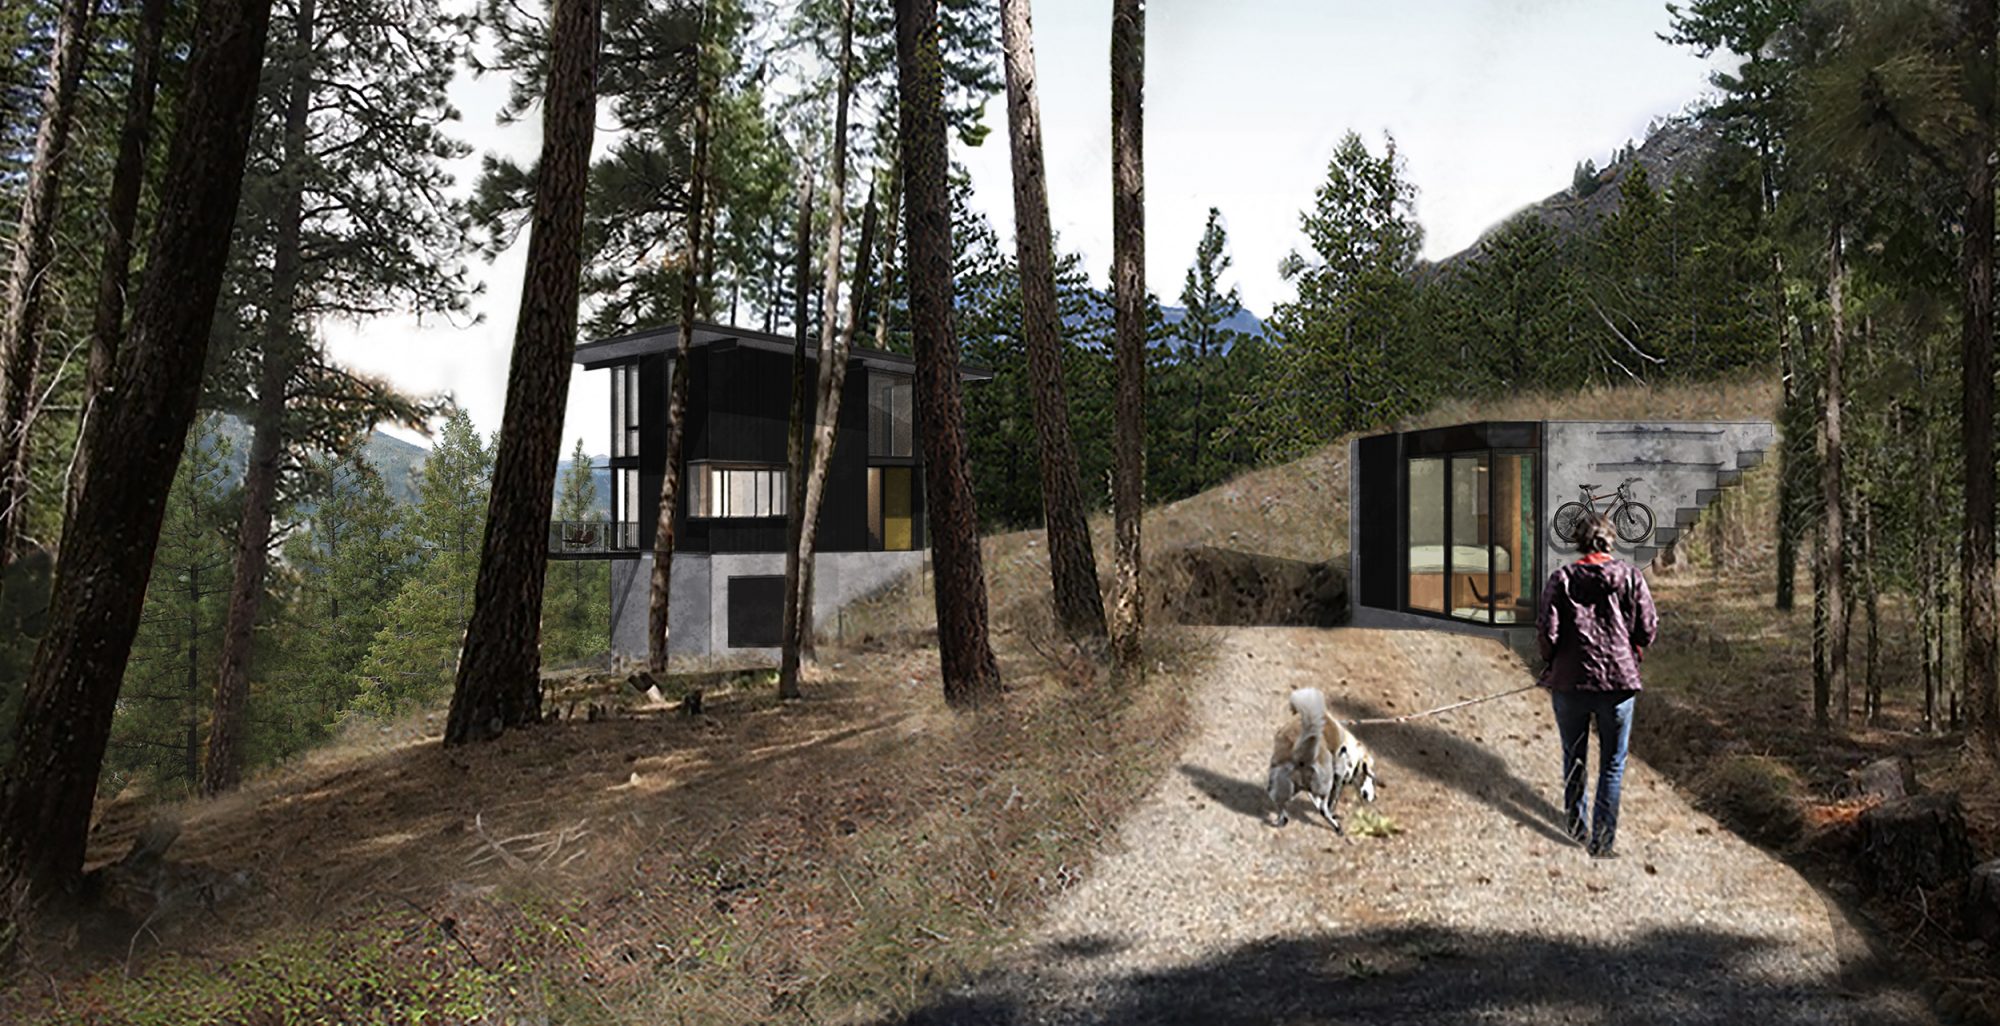 ARROWLEAF CABIN AND TINYLEAF CABIN CONCEPT RENDERING